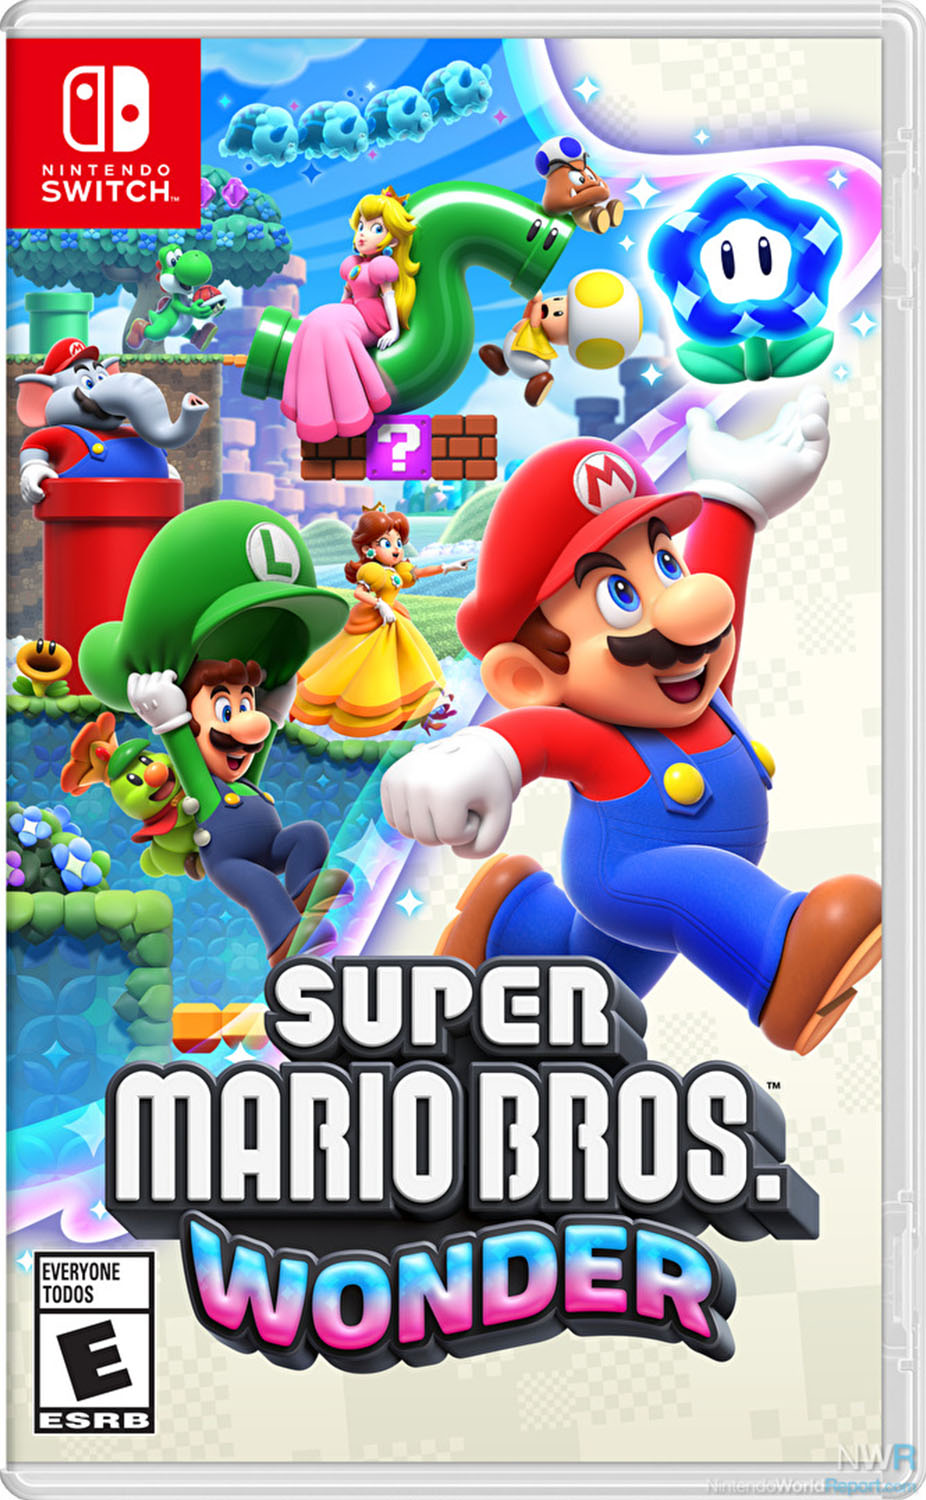 Cover of Super Mario Bros Wonder with Mario jumping in front of island setting